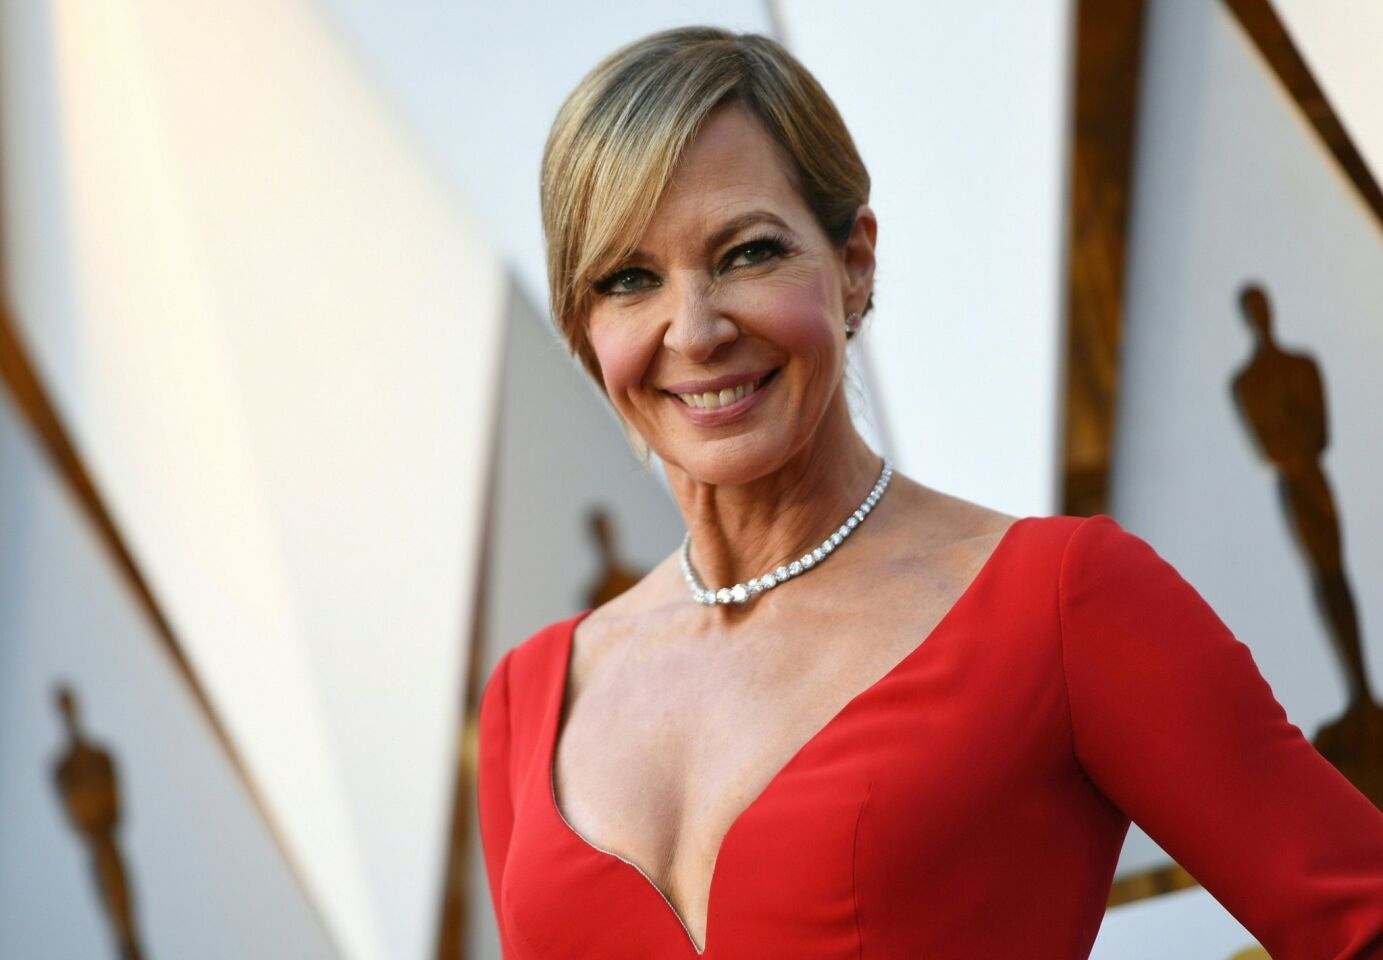 Allison Janney arrives for the 90th Annual Academy Awards on March 4, 2018, in Hollywood, California. / AFP PHOTO / VALERIE MACONVALERIE MACON/AFP/Getty Images ** OUTS - ELSENT, FPG, CM - OUTS * NM, PH, VA if sourced by CT, LA or MoD **